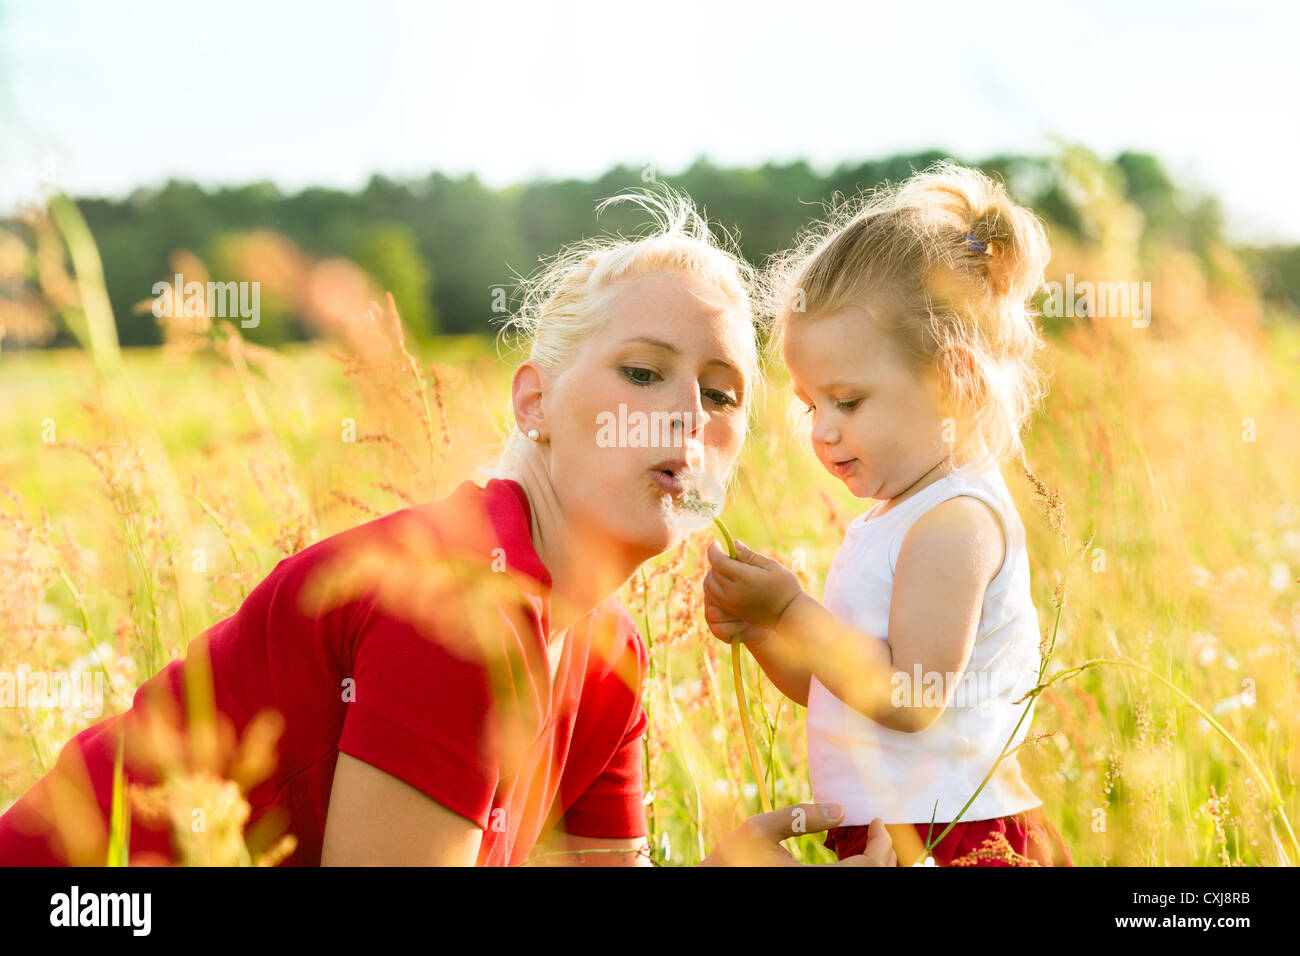 Family summer - blowing dandelion seeds in sunshine Stock Photo